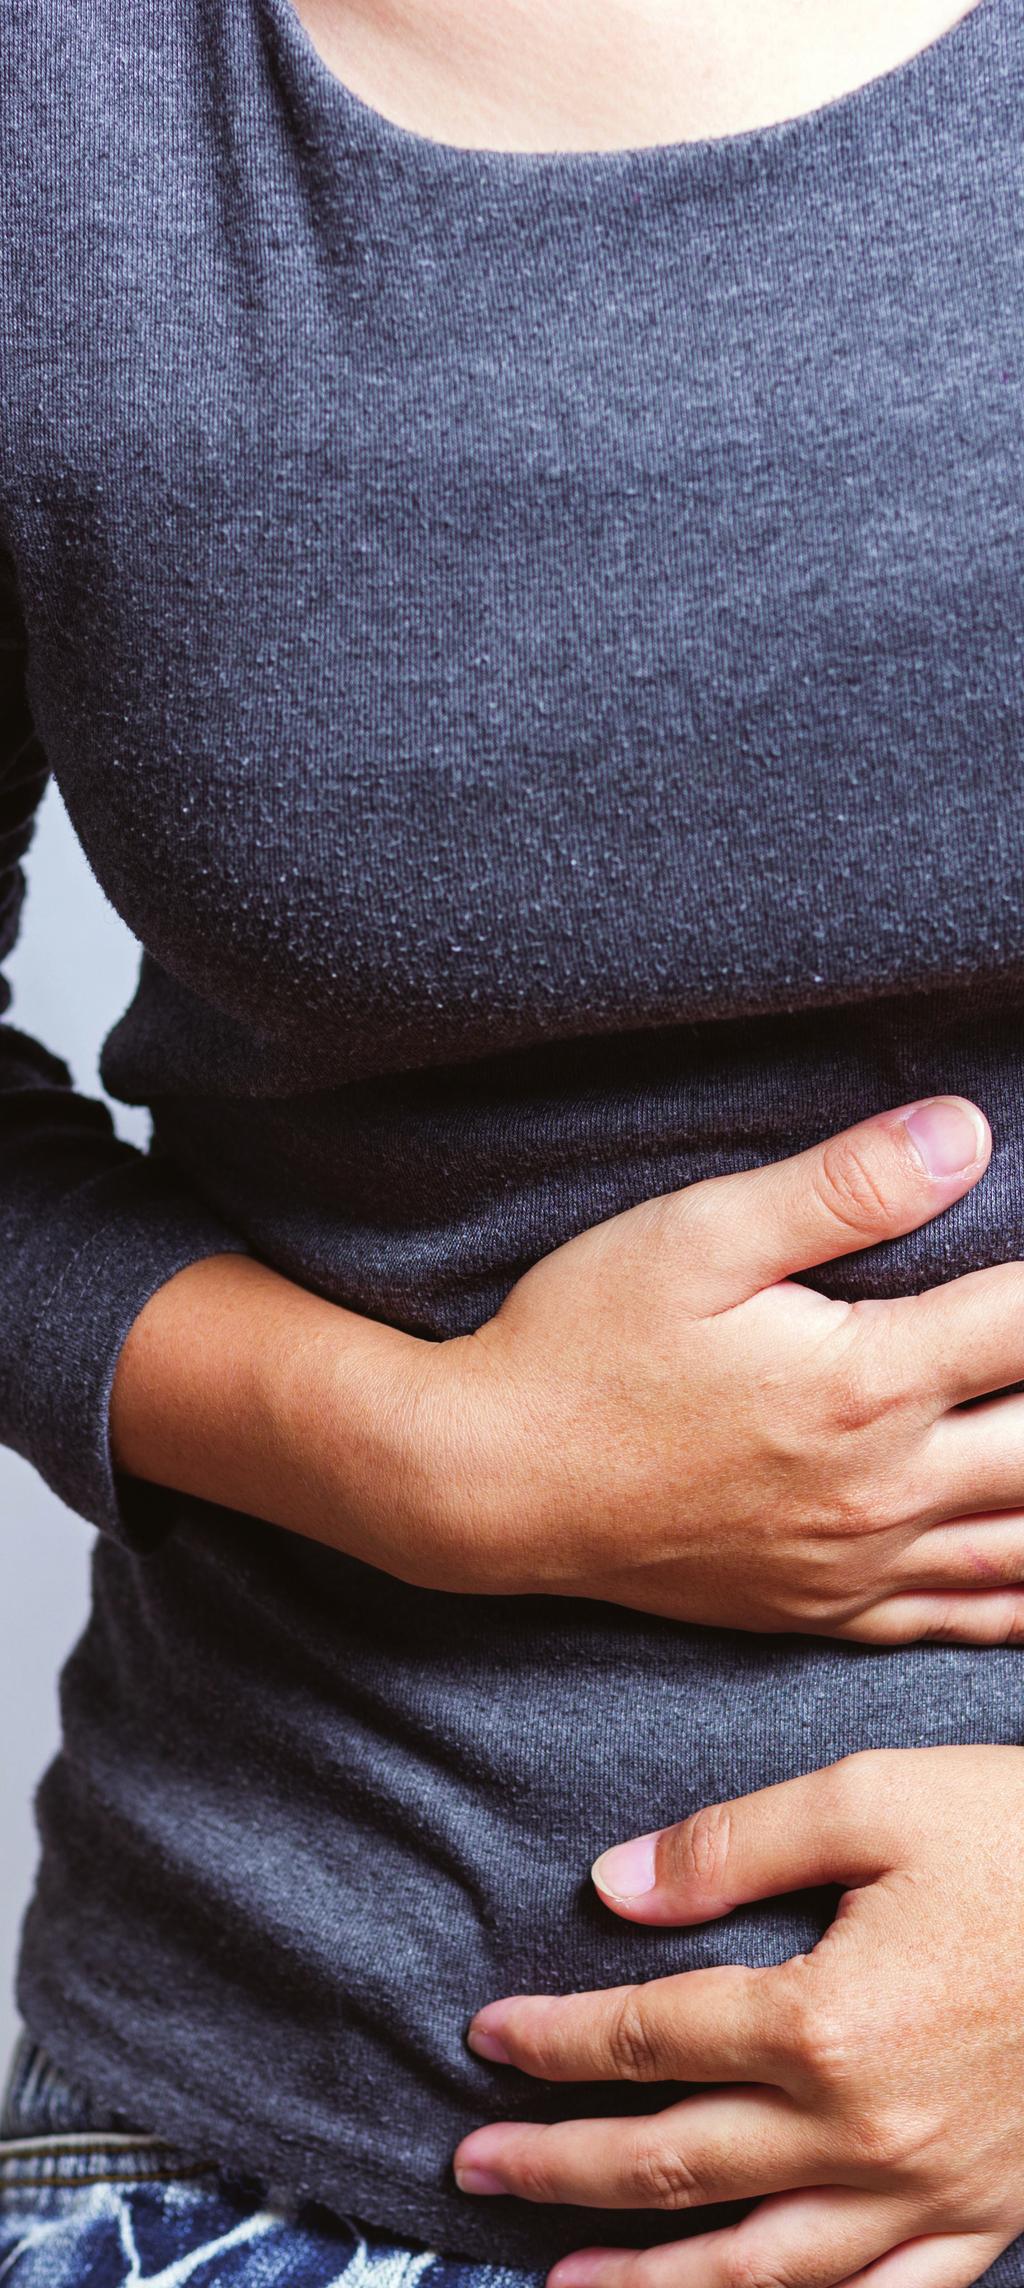 Symptoms of IBS Each person, based on the type of IBS he or she has, will have different symptoms. IBS in general can cause symptoms such as: Belly pain. Cramping. Gas.